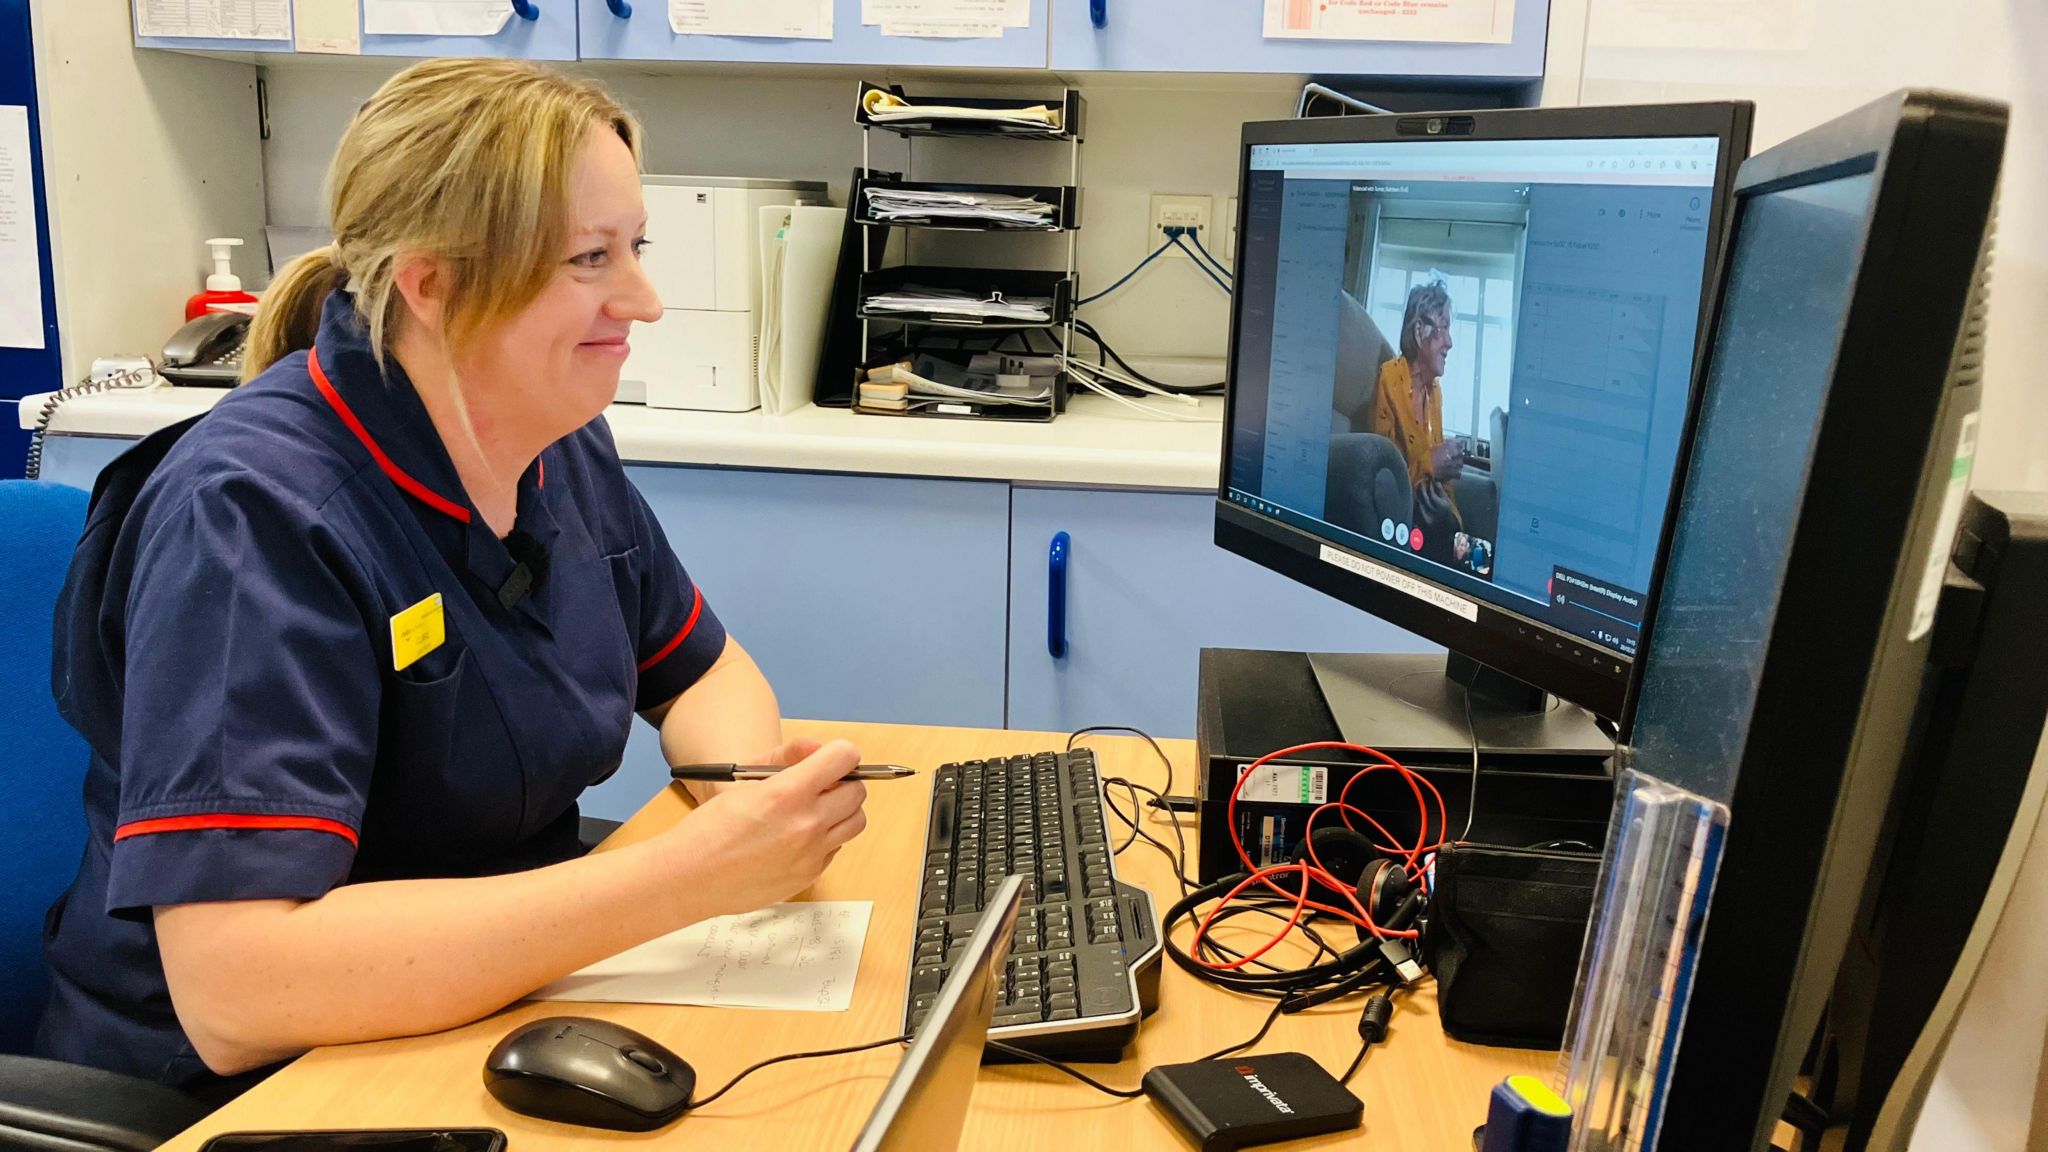 Virtual wards help free up hospital beds and avoid hospital admissions